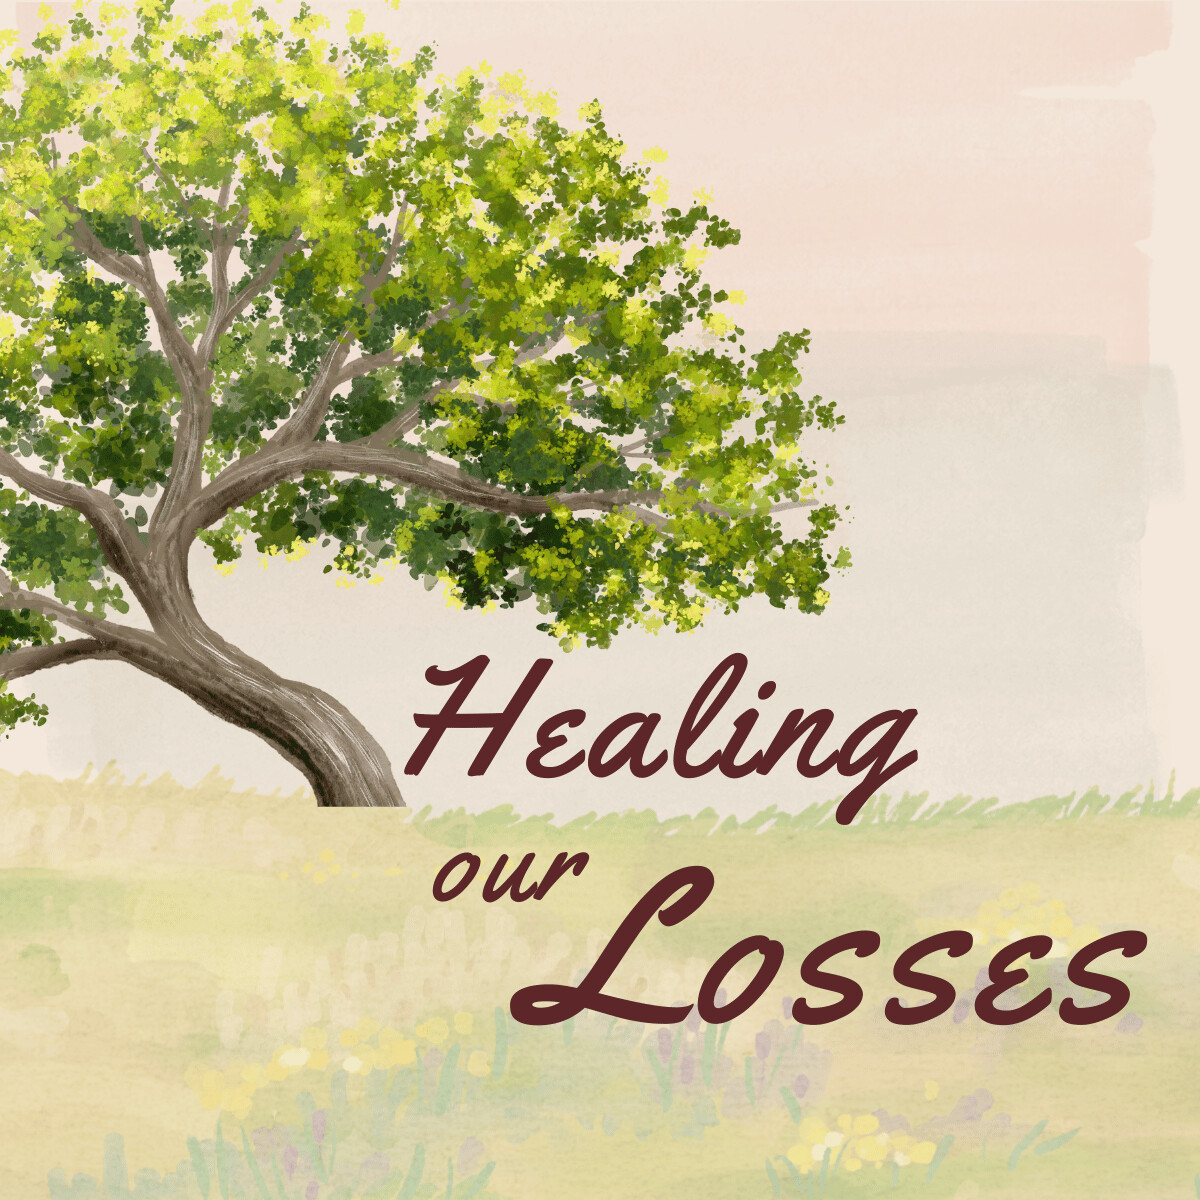 Healing our Losses